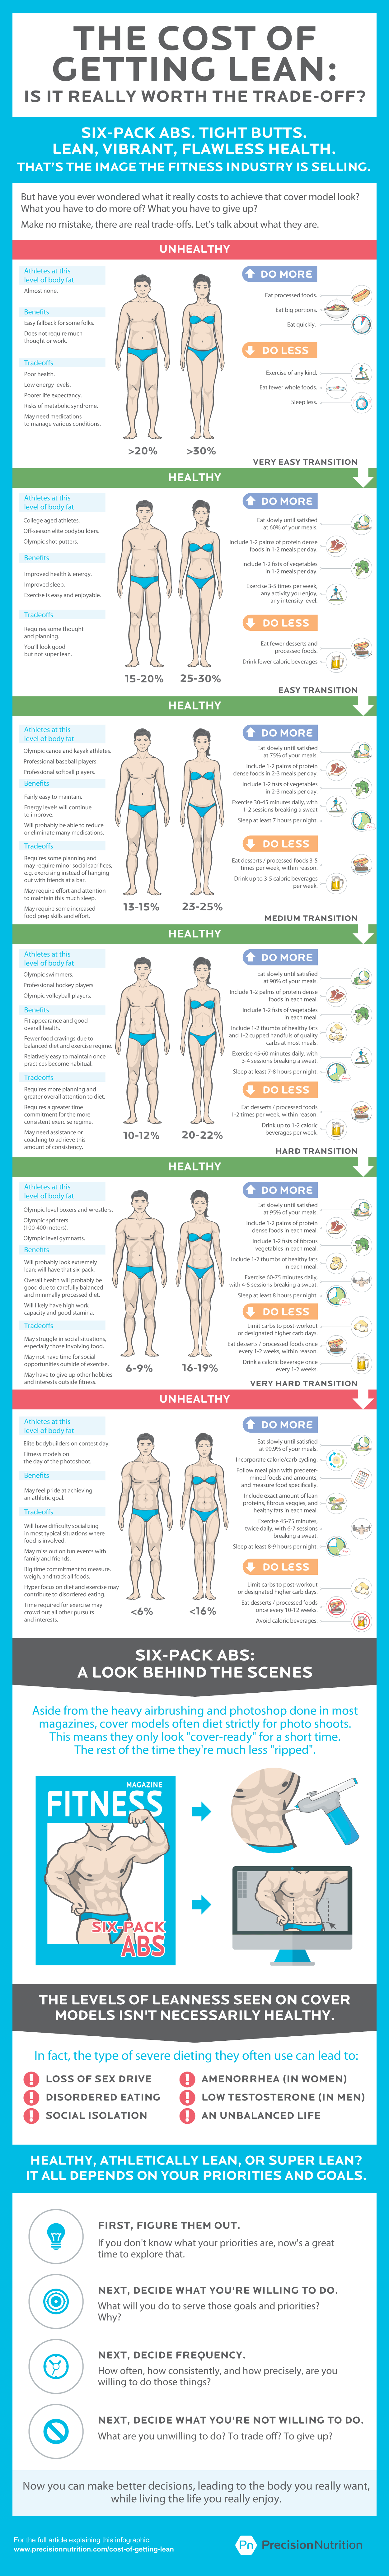 precision-nutrition-cost-of-getting-lean-infographic.png